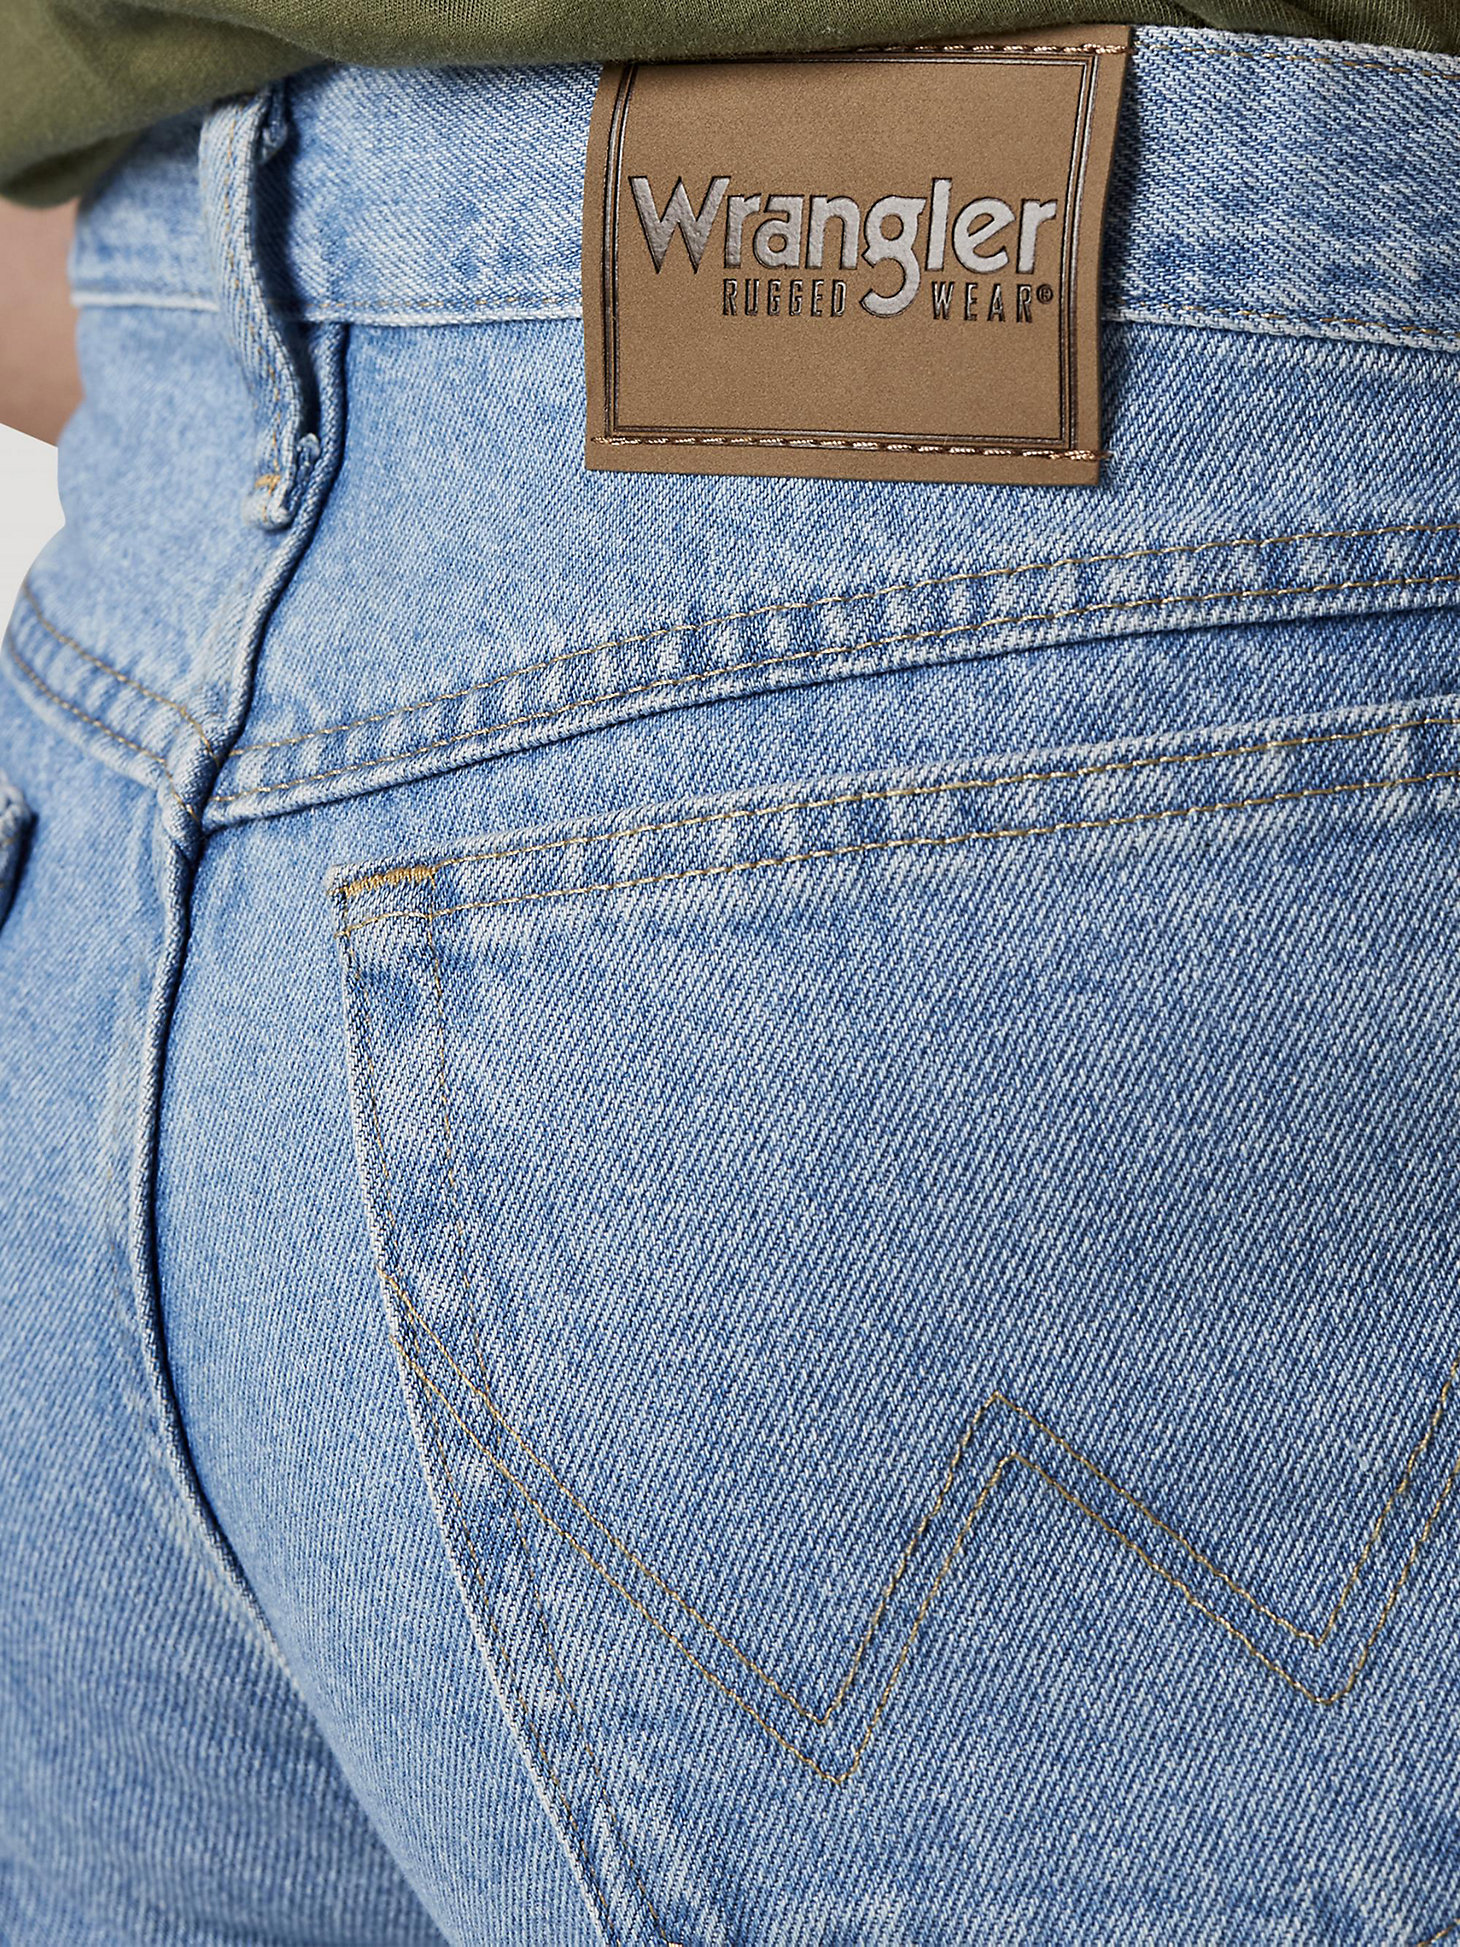 Wrangler Rugged Wear® Relaxed Fit Short in Vintage Indigo alternative view 3